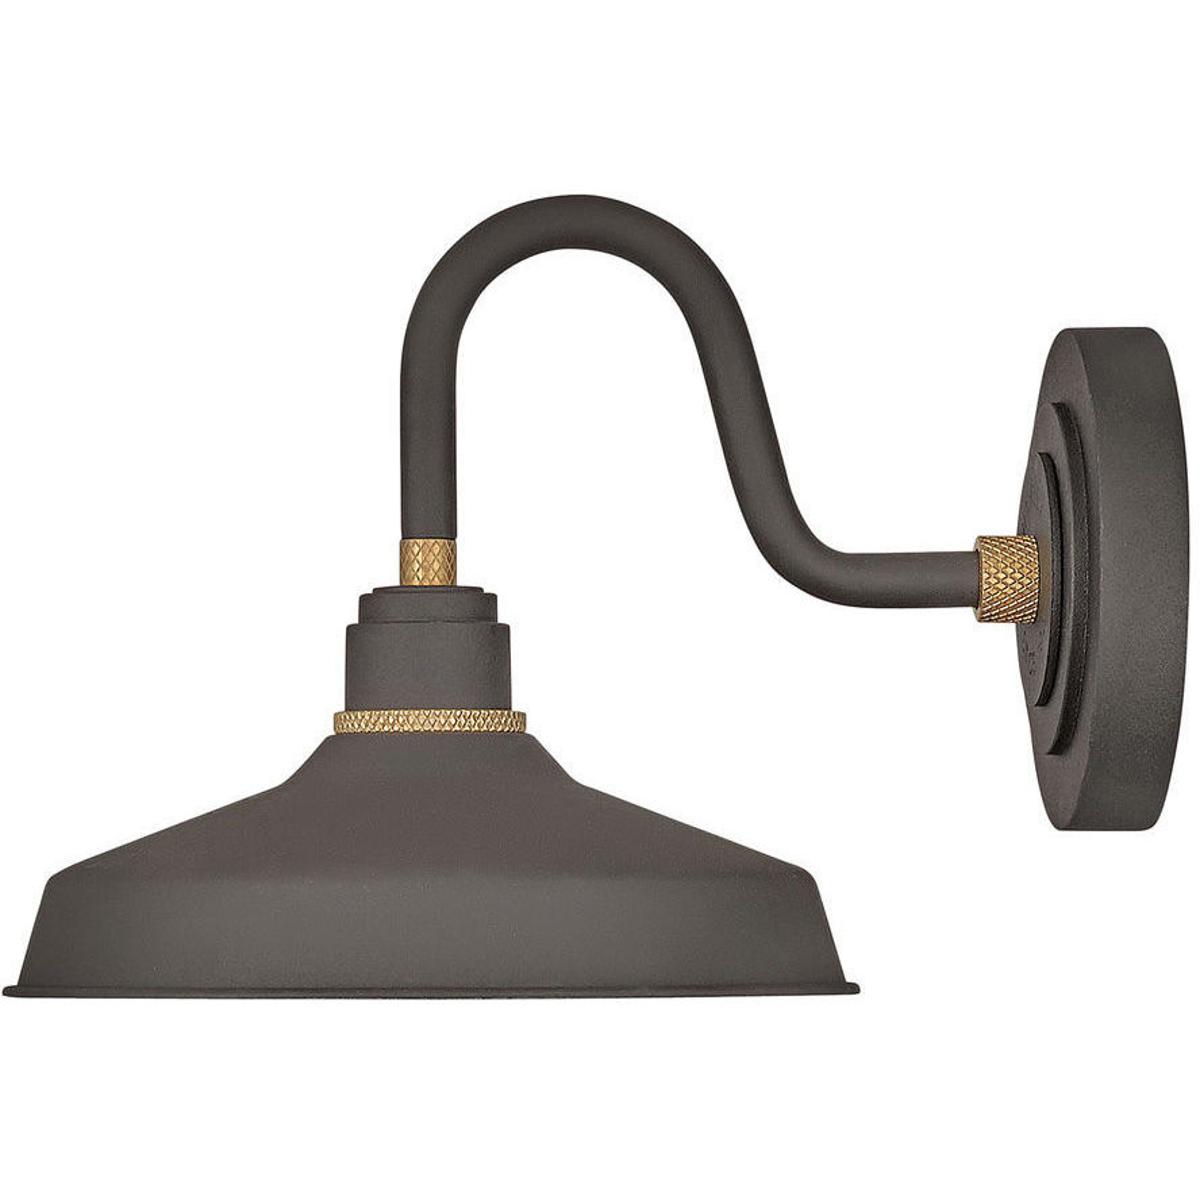 Hinkley 10231MR Foundry Classic LED 9.25 inch Museum Bronze with Brass Outdoor Barn Light, Gooseneck